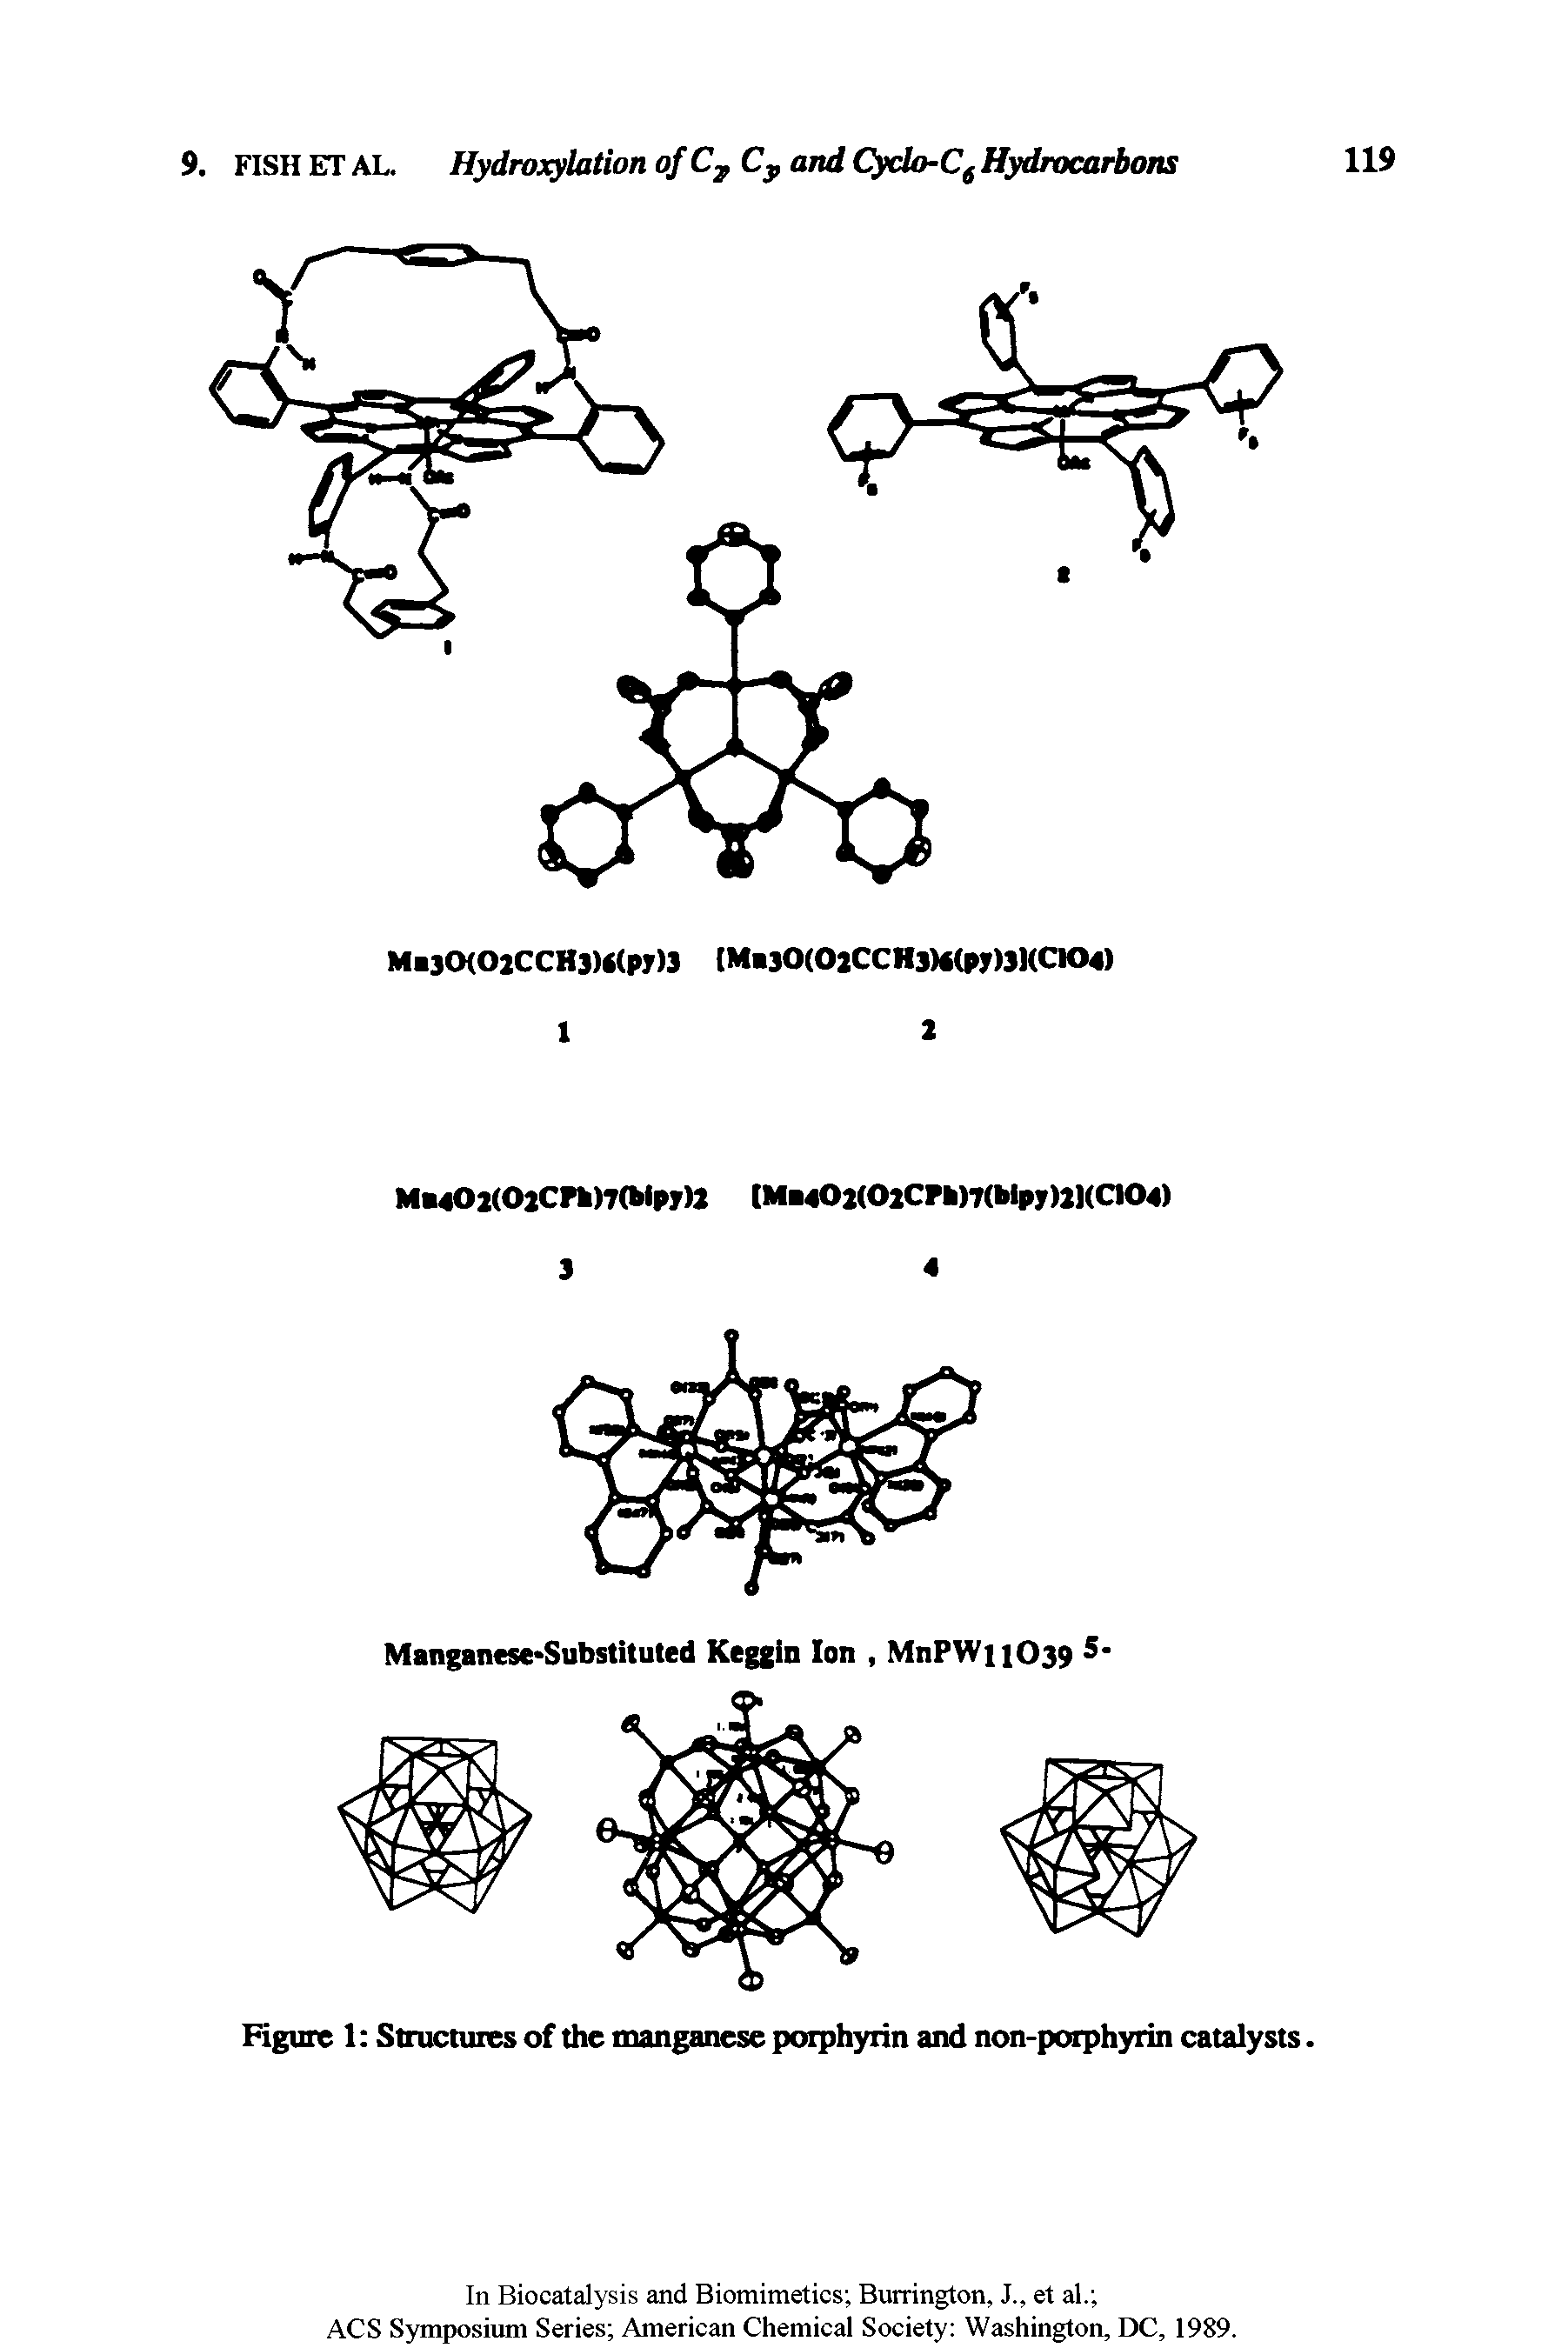 Figure 1 Structures of the manganese porphyrin and non-porphyrin catalysts.